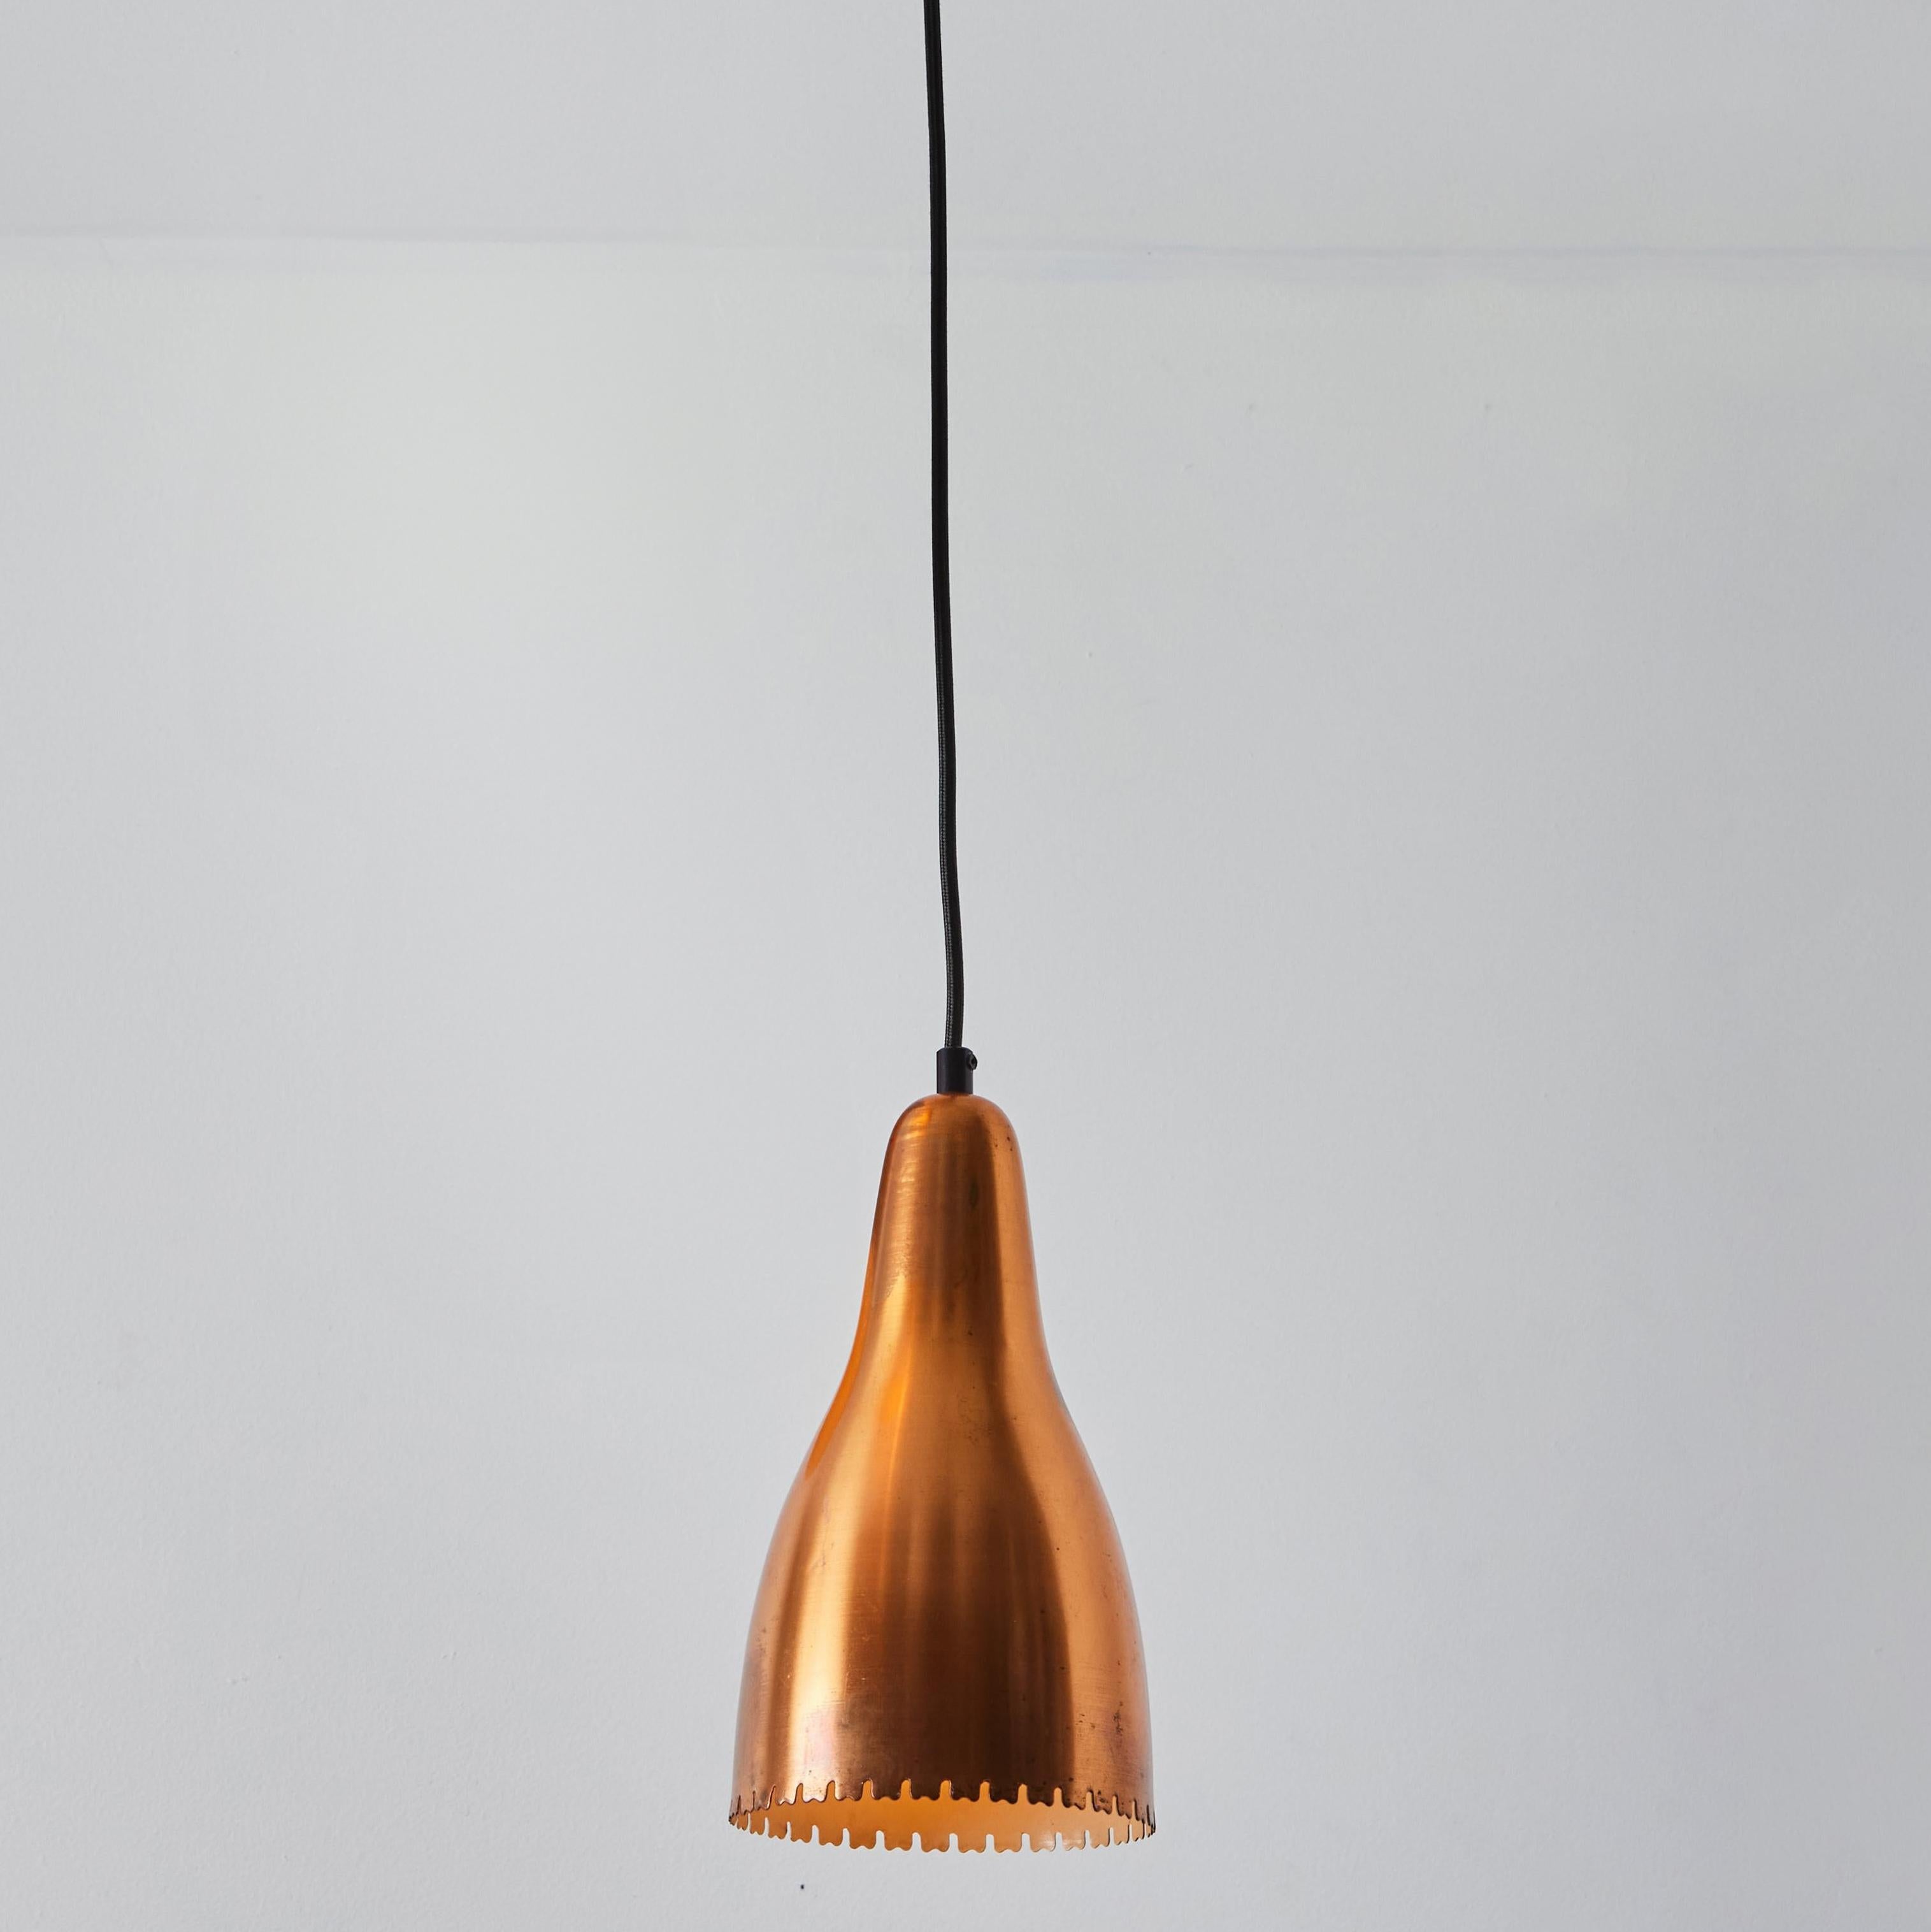 1950s Bent Karlby Perforated Copper Pendant for Lyfa. Executed in architecturally cut and elegantly shaped copper shades with an attractive patina, Denmark, circa 1950s. A quintessentially Danish Modern pendant by a master Swedish designer whose